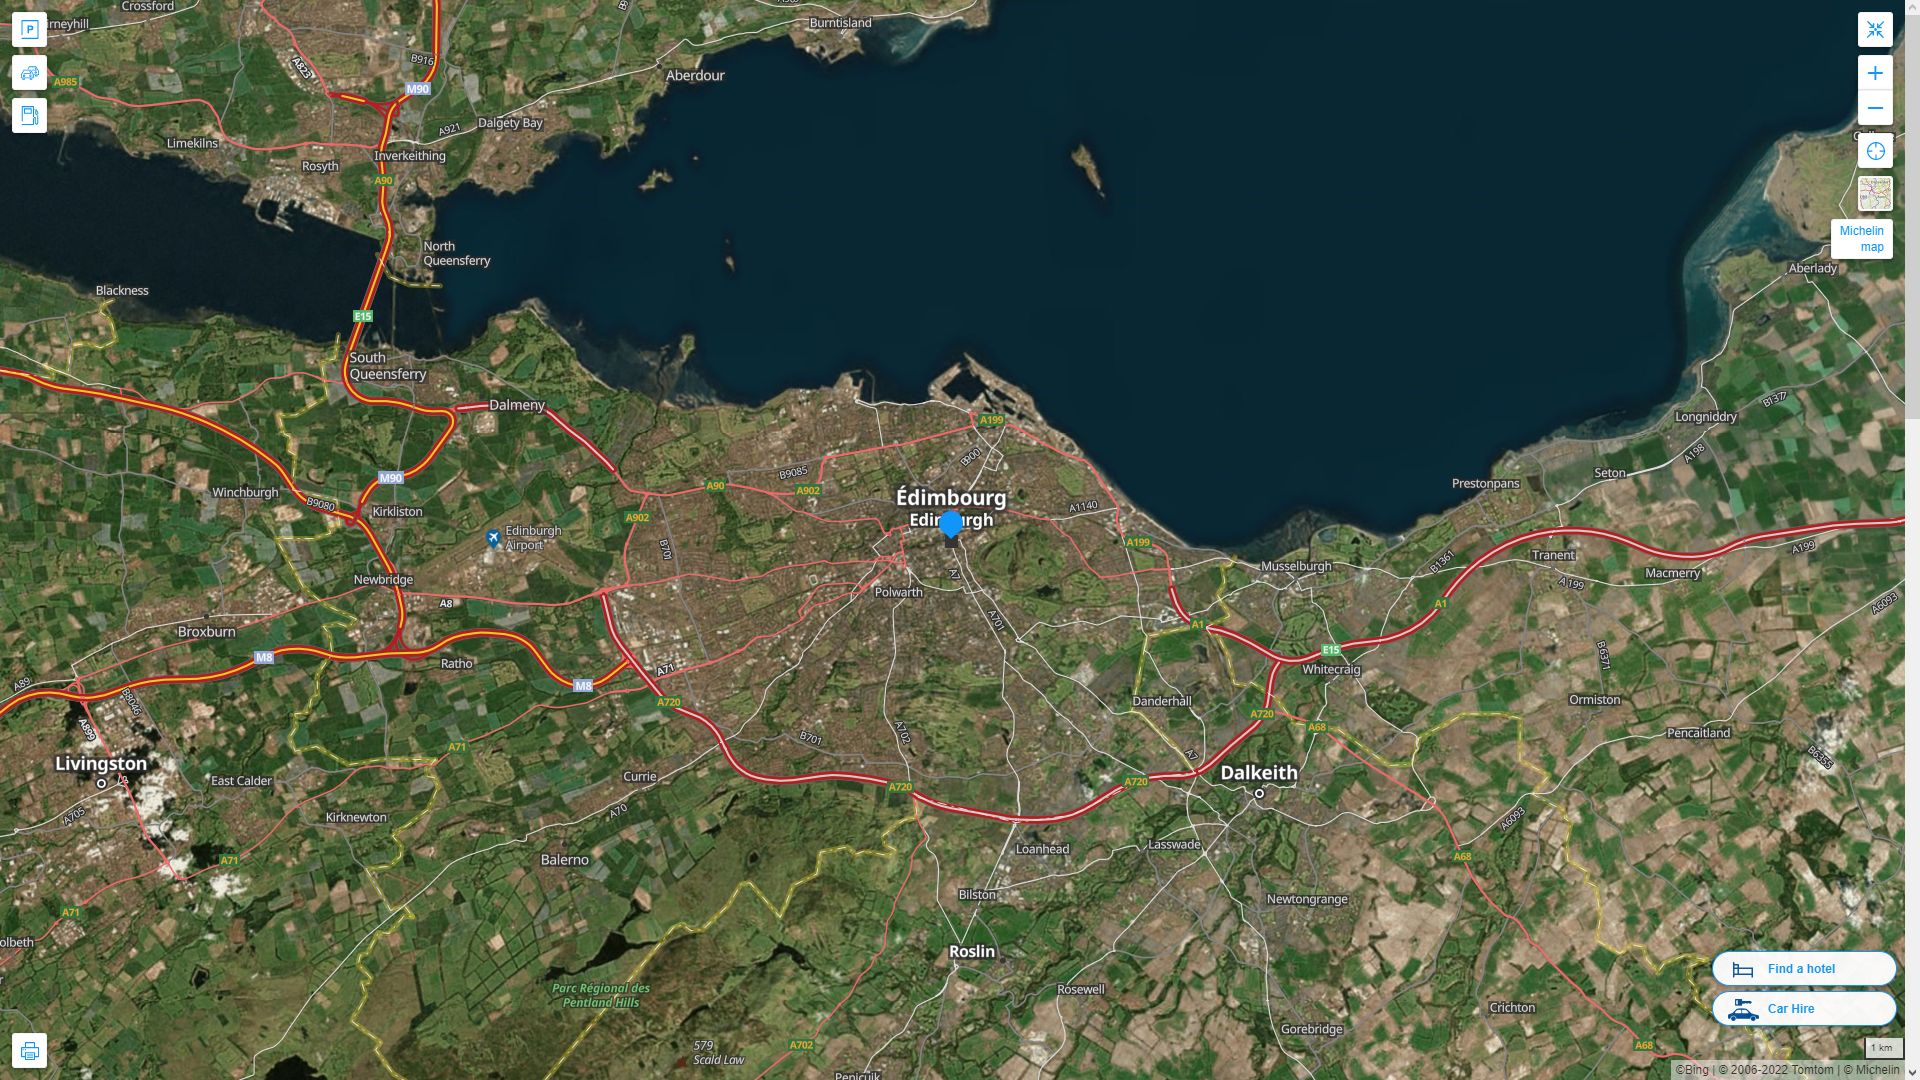 Edinburgh Highway and Road Map with Satellite View